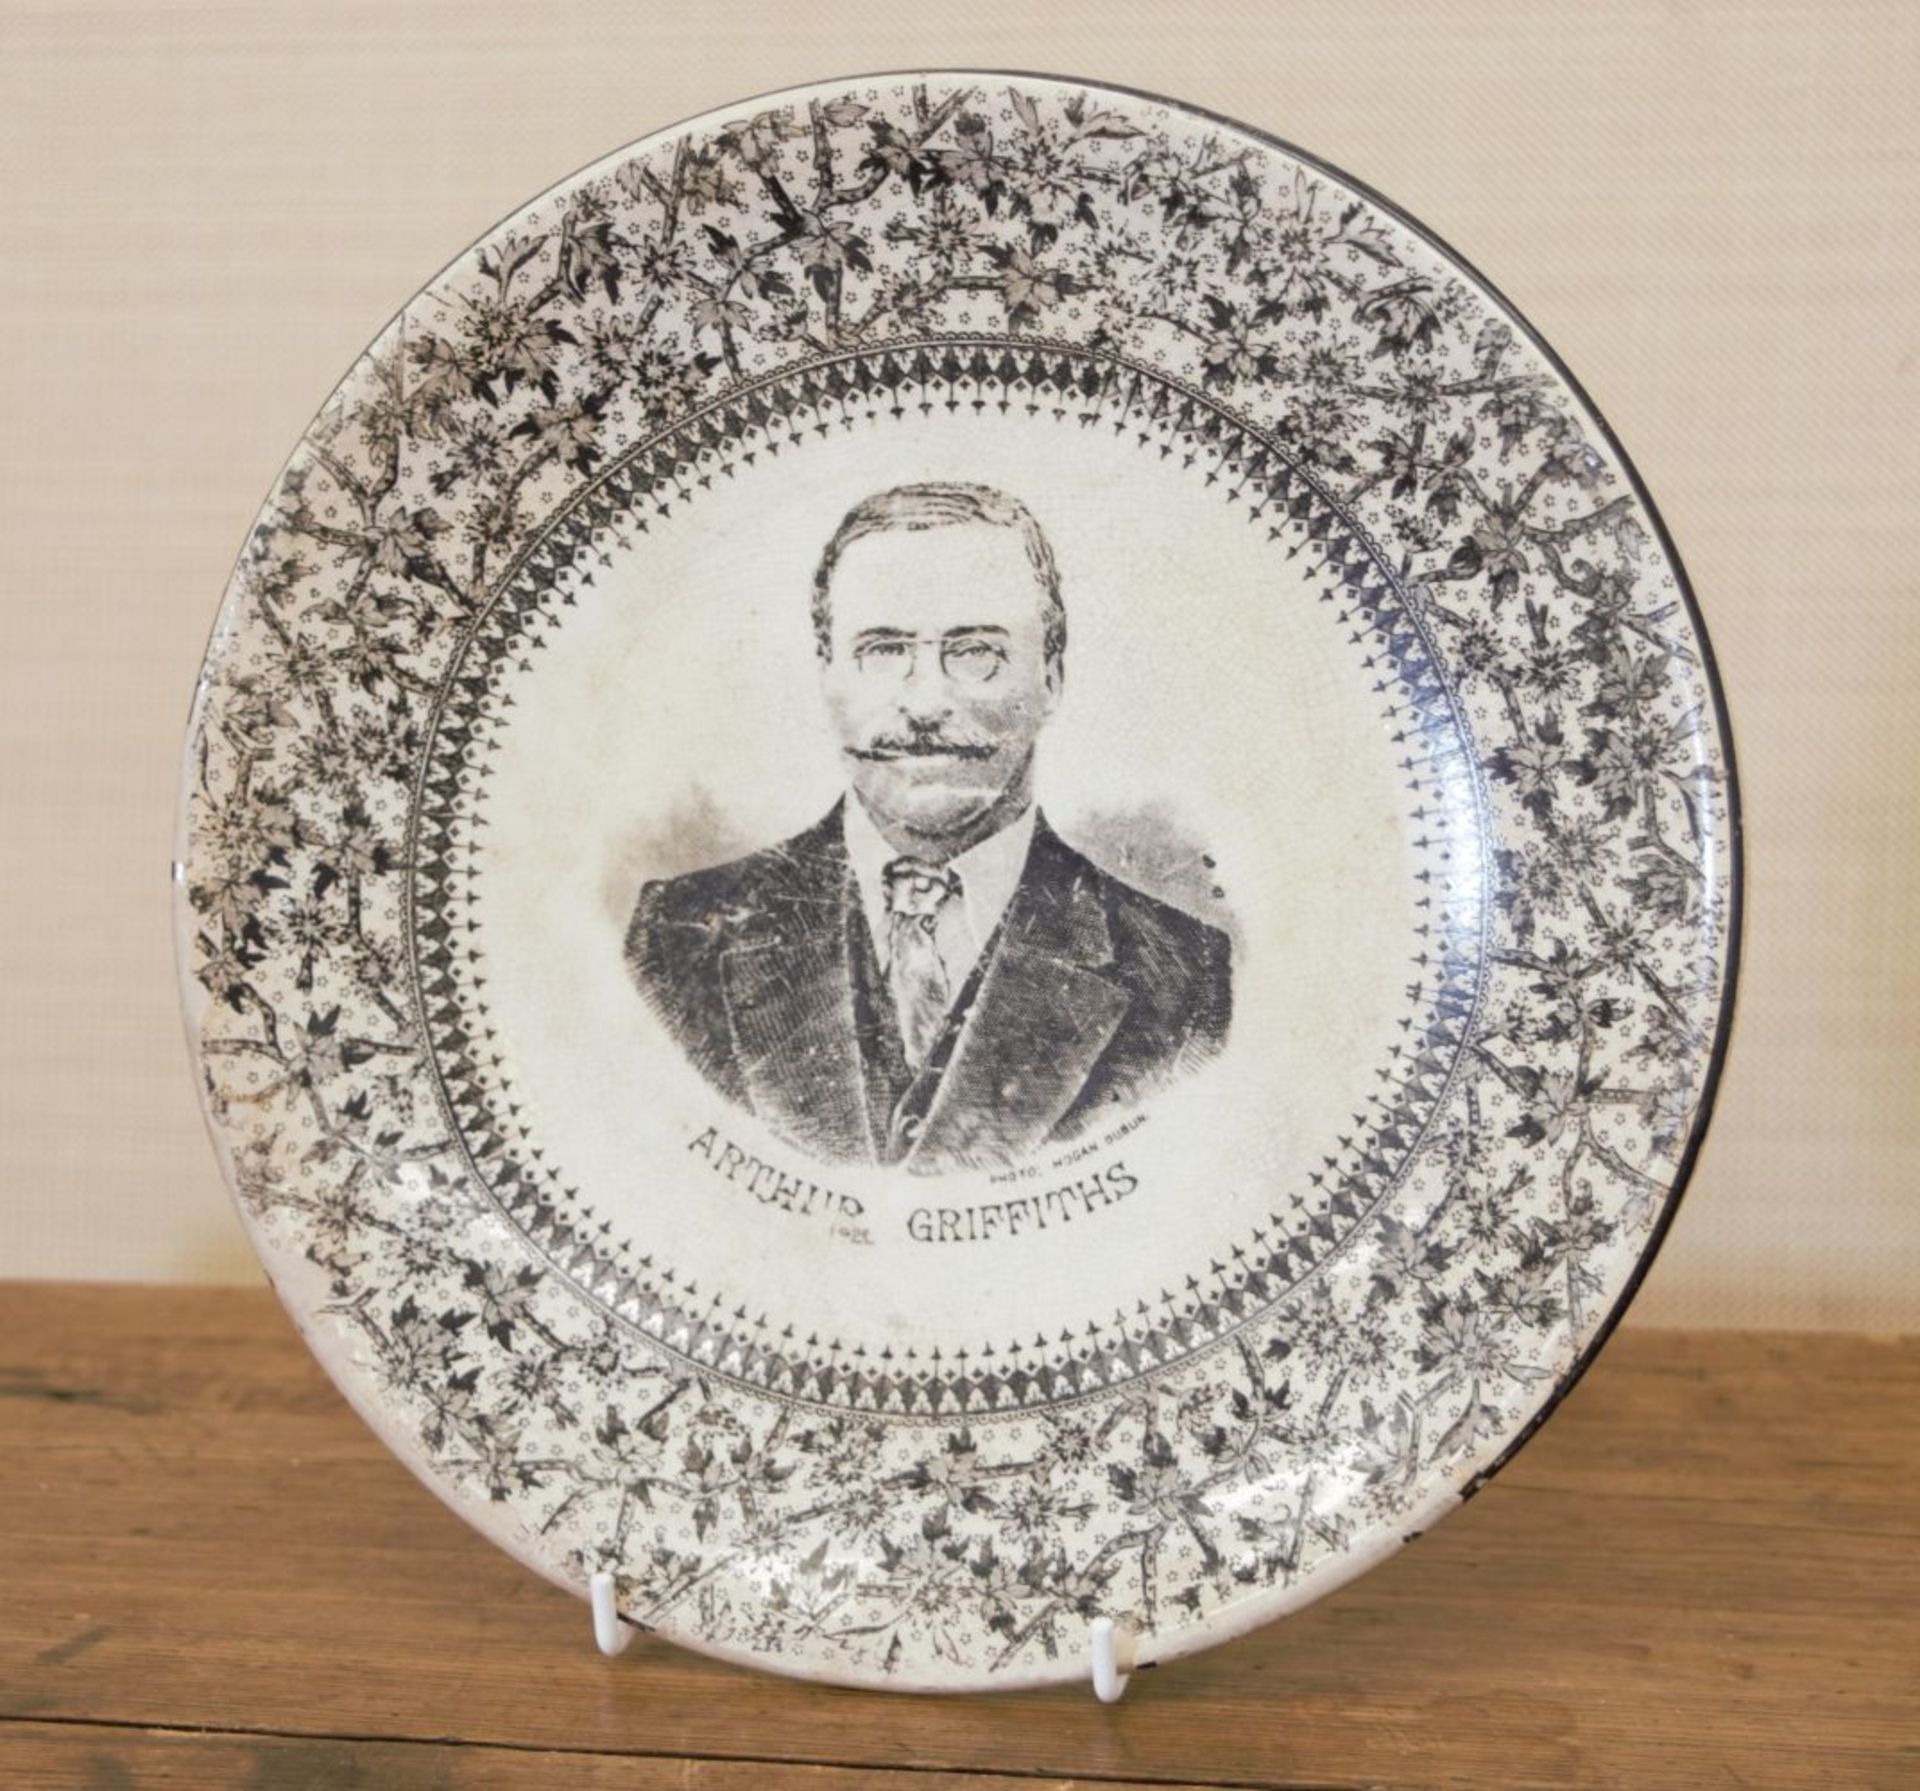 EARLY 20TH-CENTURY PORCELAIN COMMEMORATIVE PLATE - Image 2 of 2